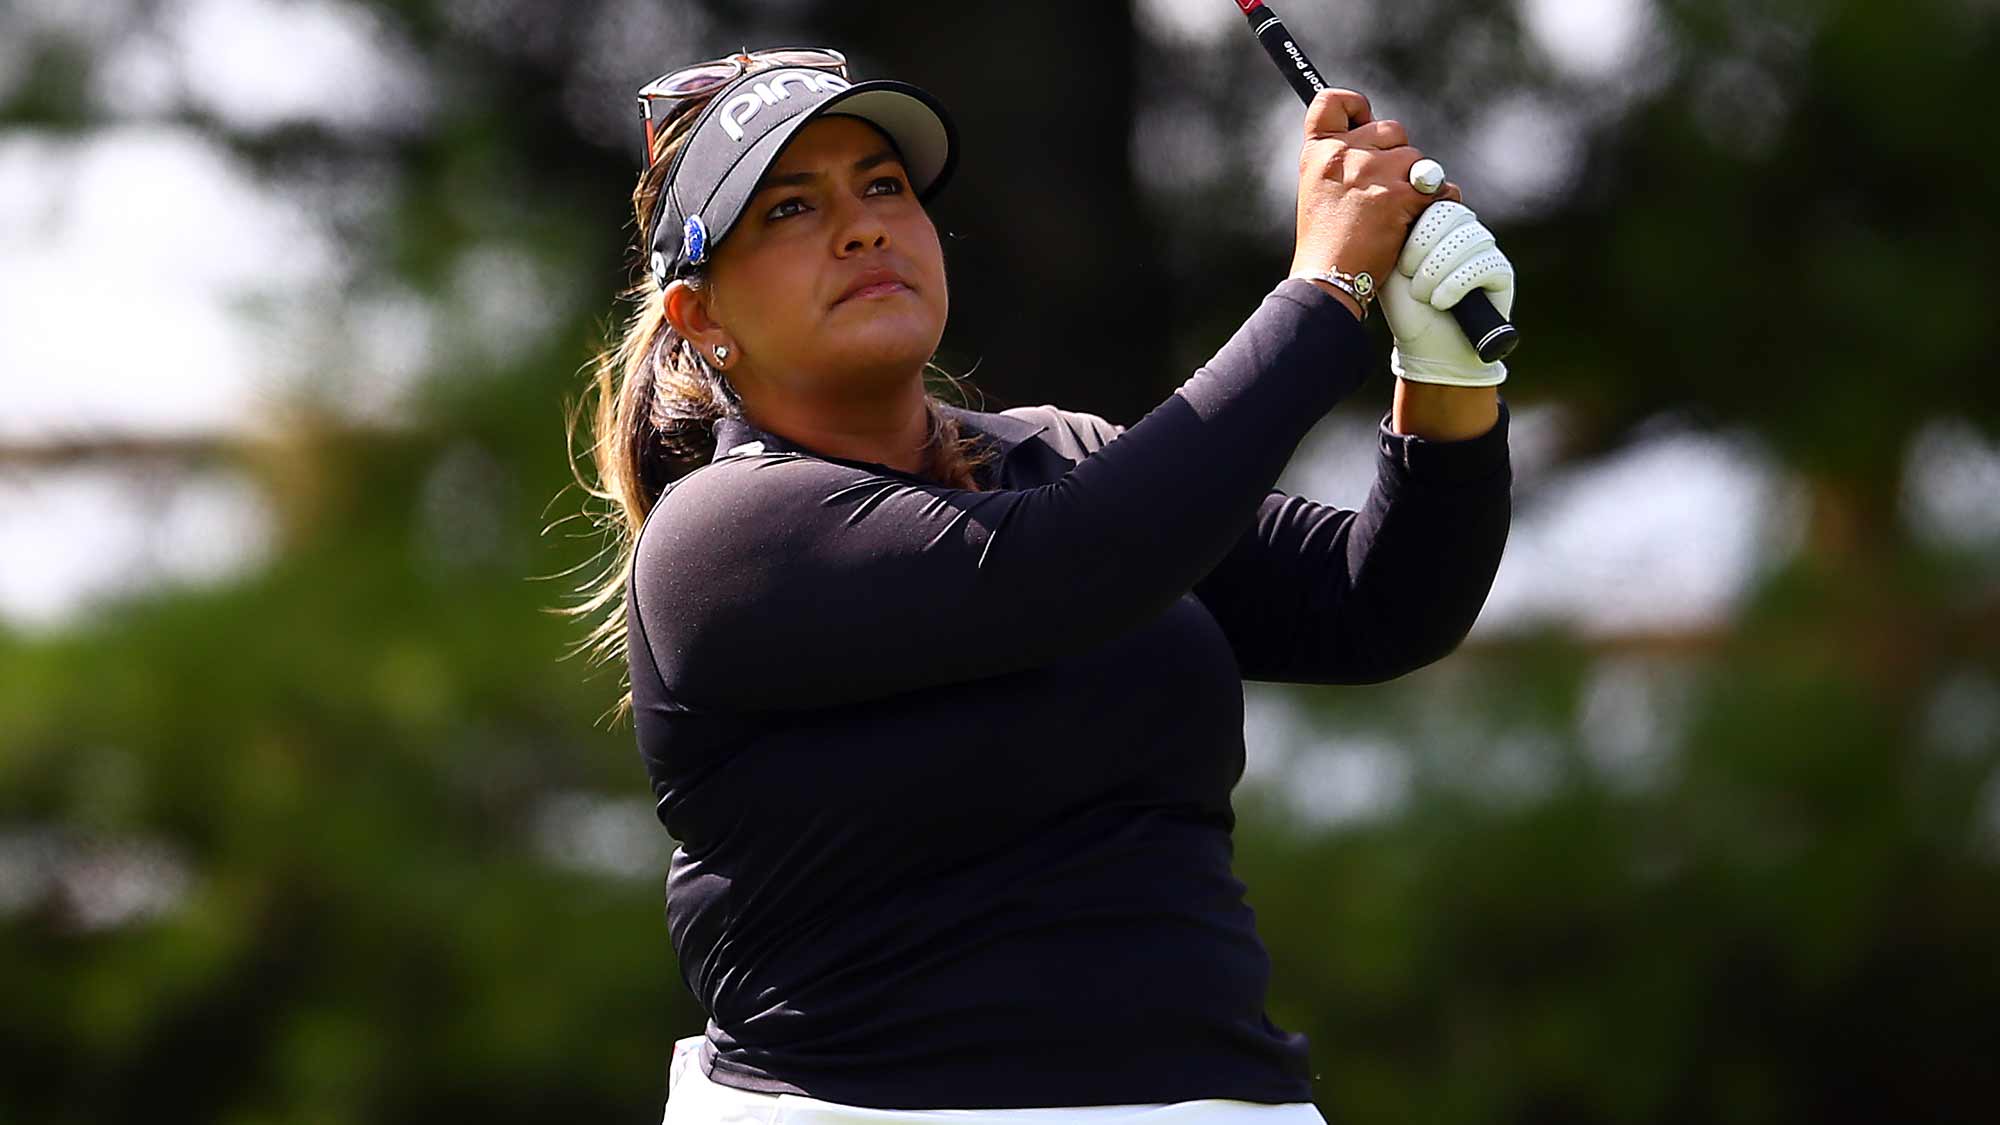  Lizette Salas of the United States hits her tee shot on the 2nd hole during the final round of the CP Women's Open at Magna Golf Club on August 25, 2019 in Aurora, Canada